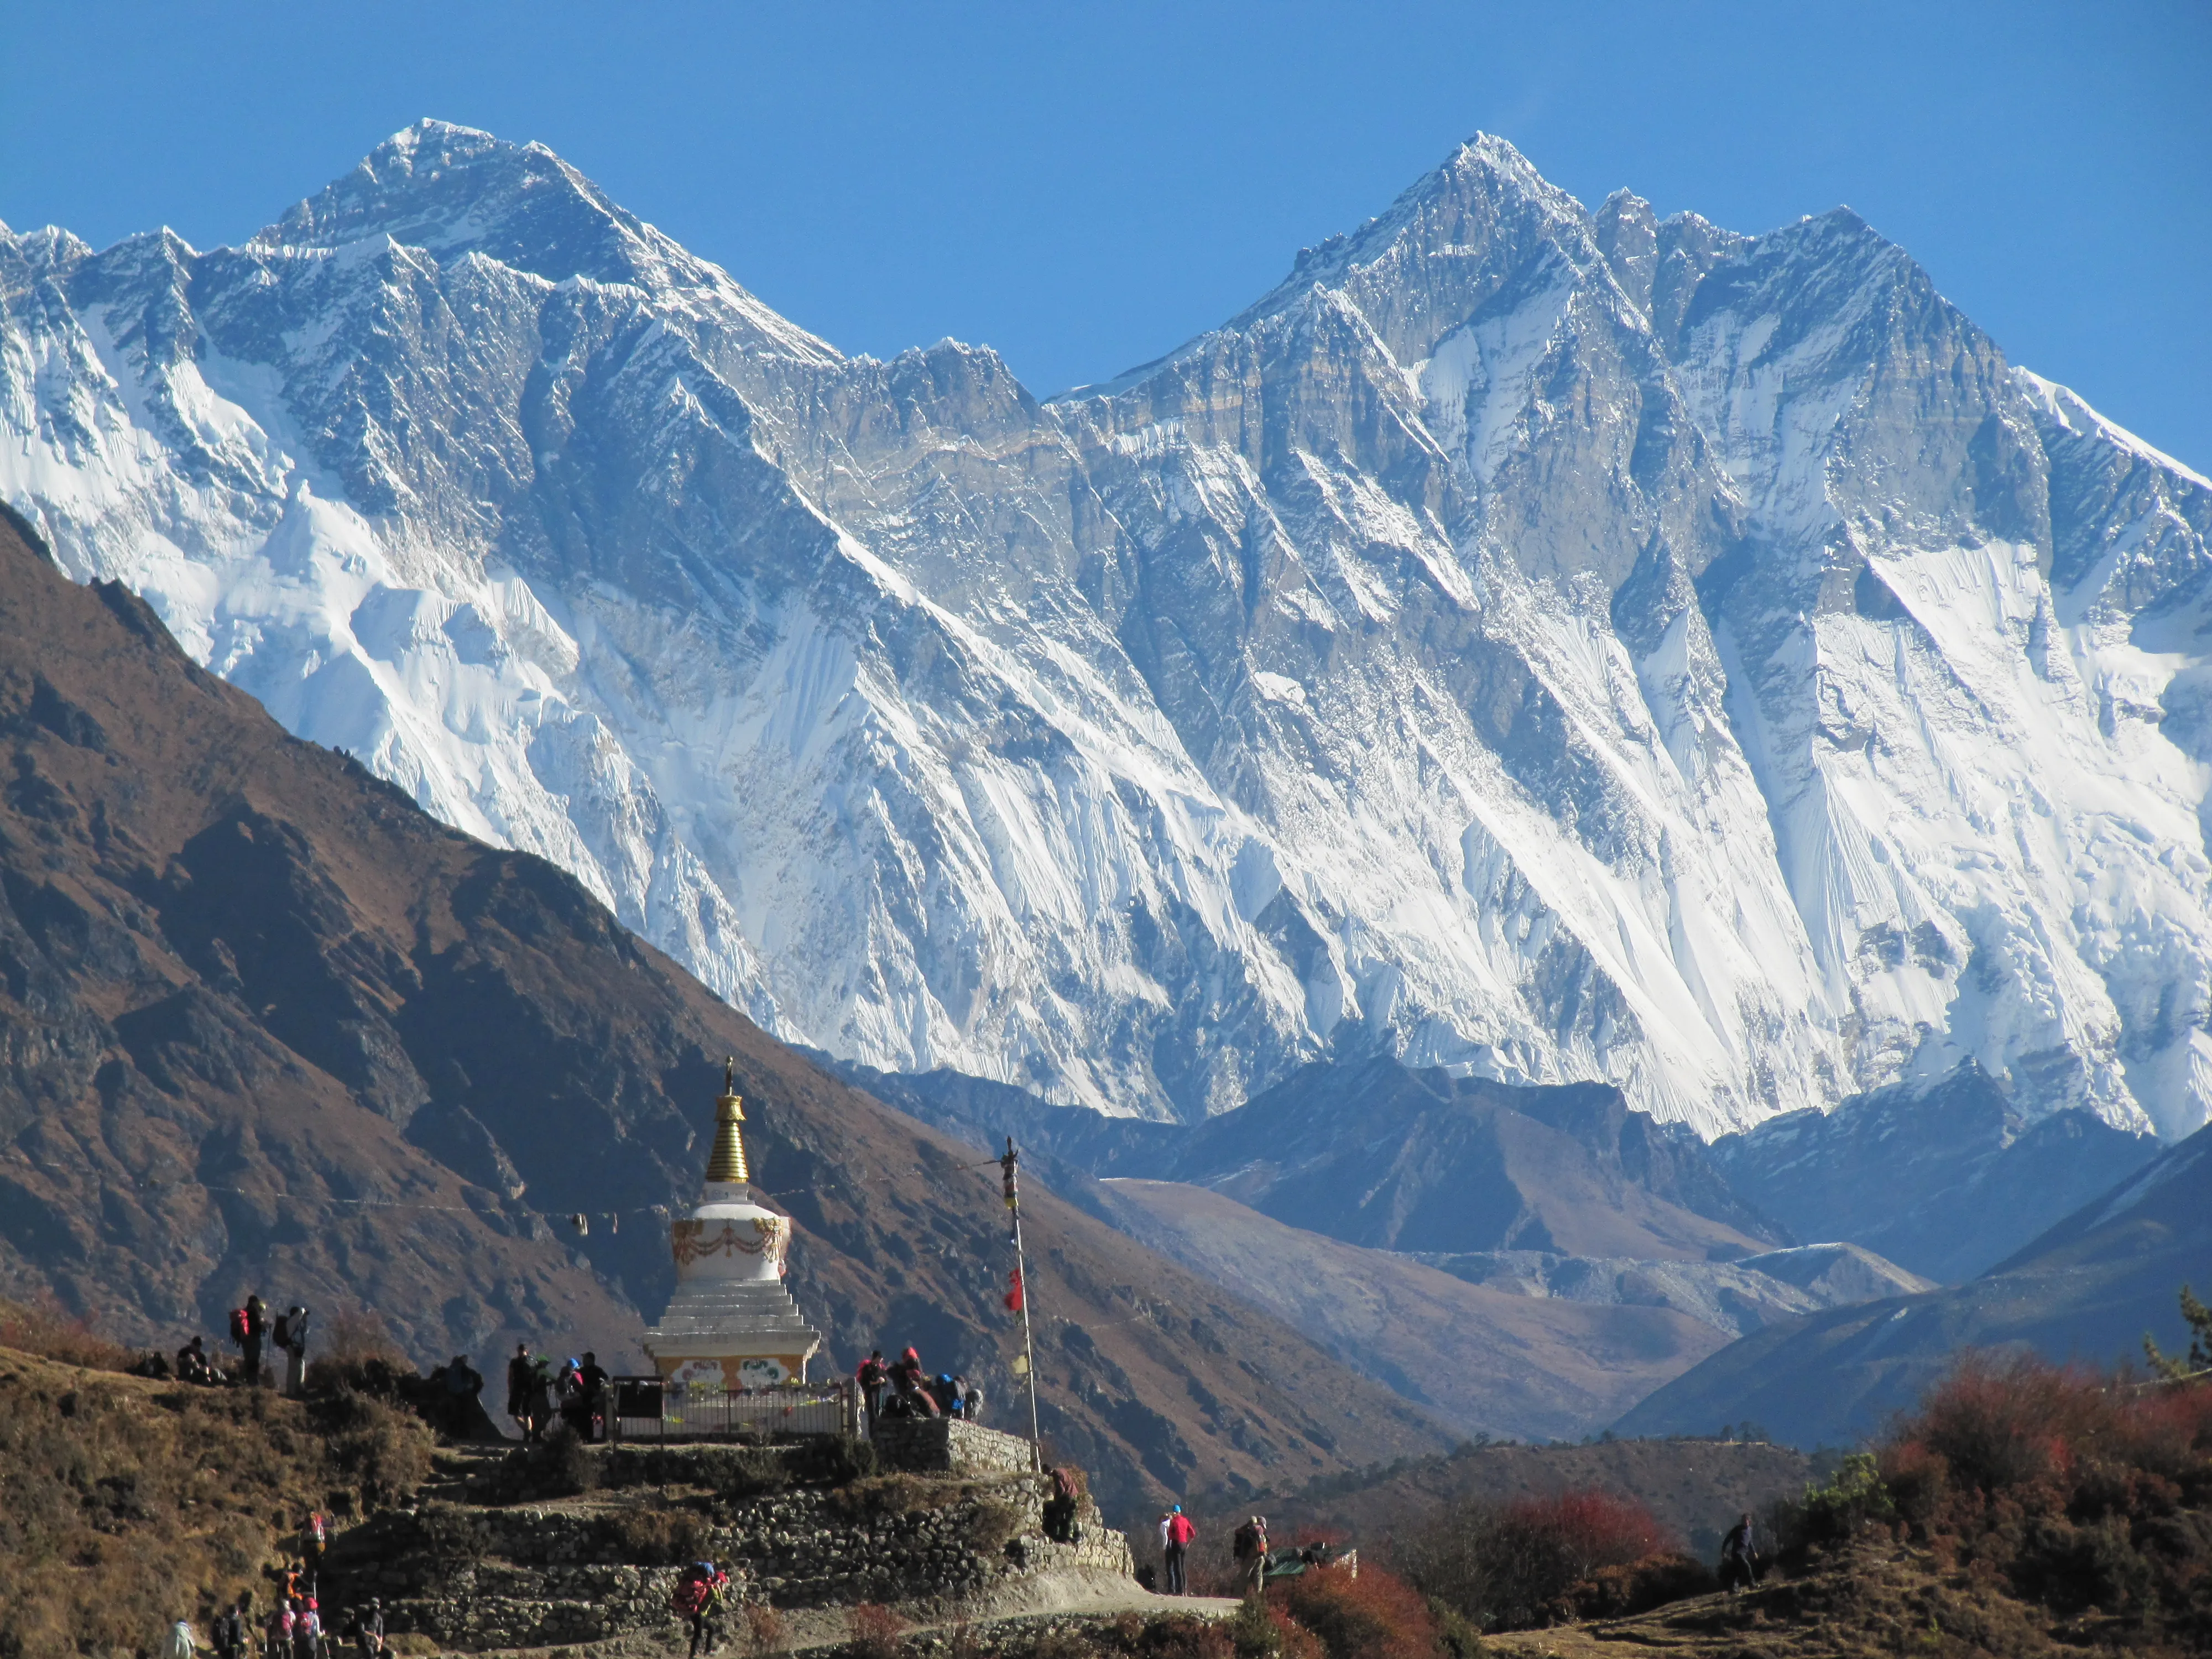 Everest Base Camp in March: Travel Tips, Weather, and More